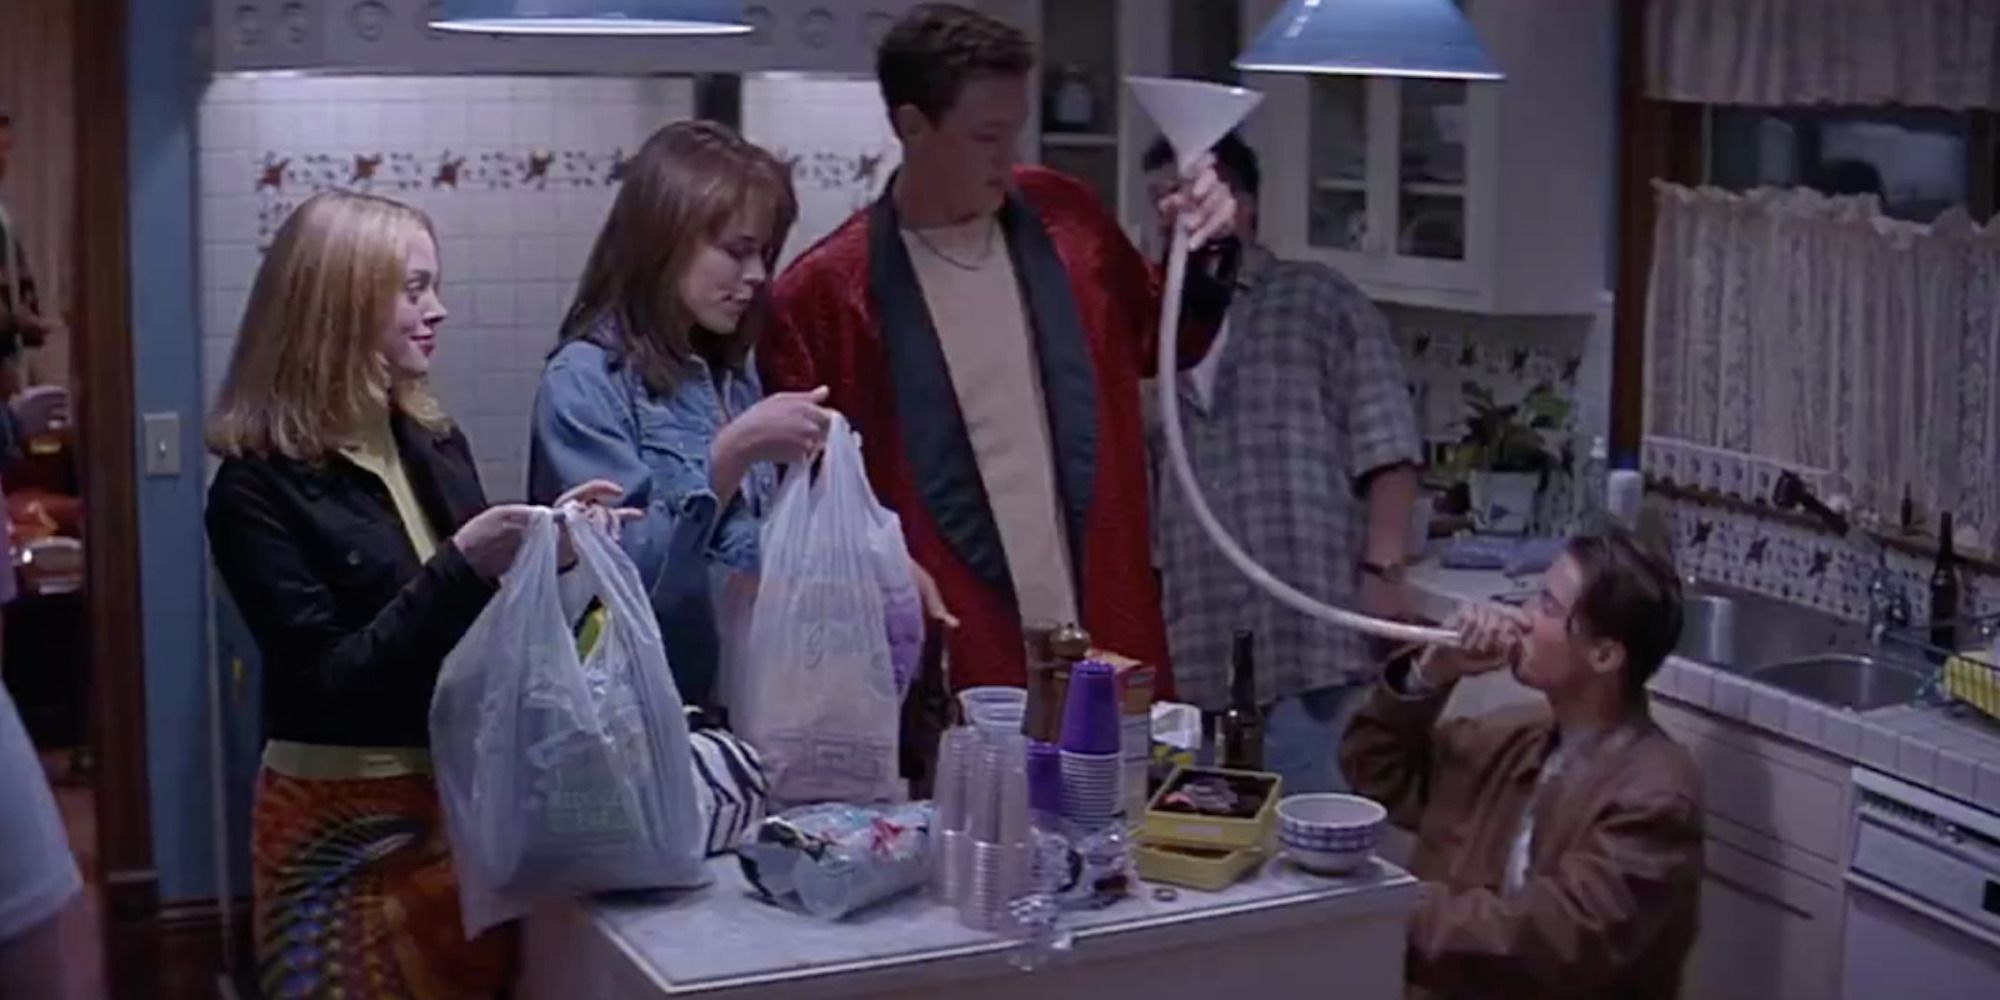 A scene featuring characters from Scream